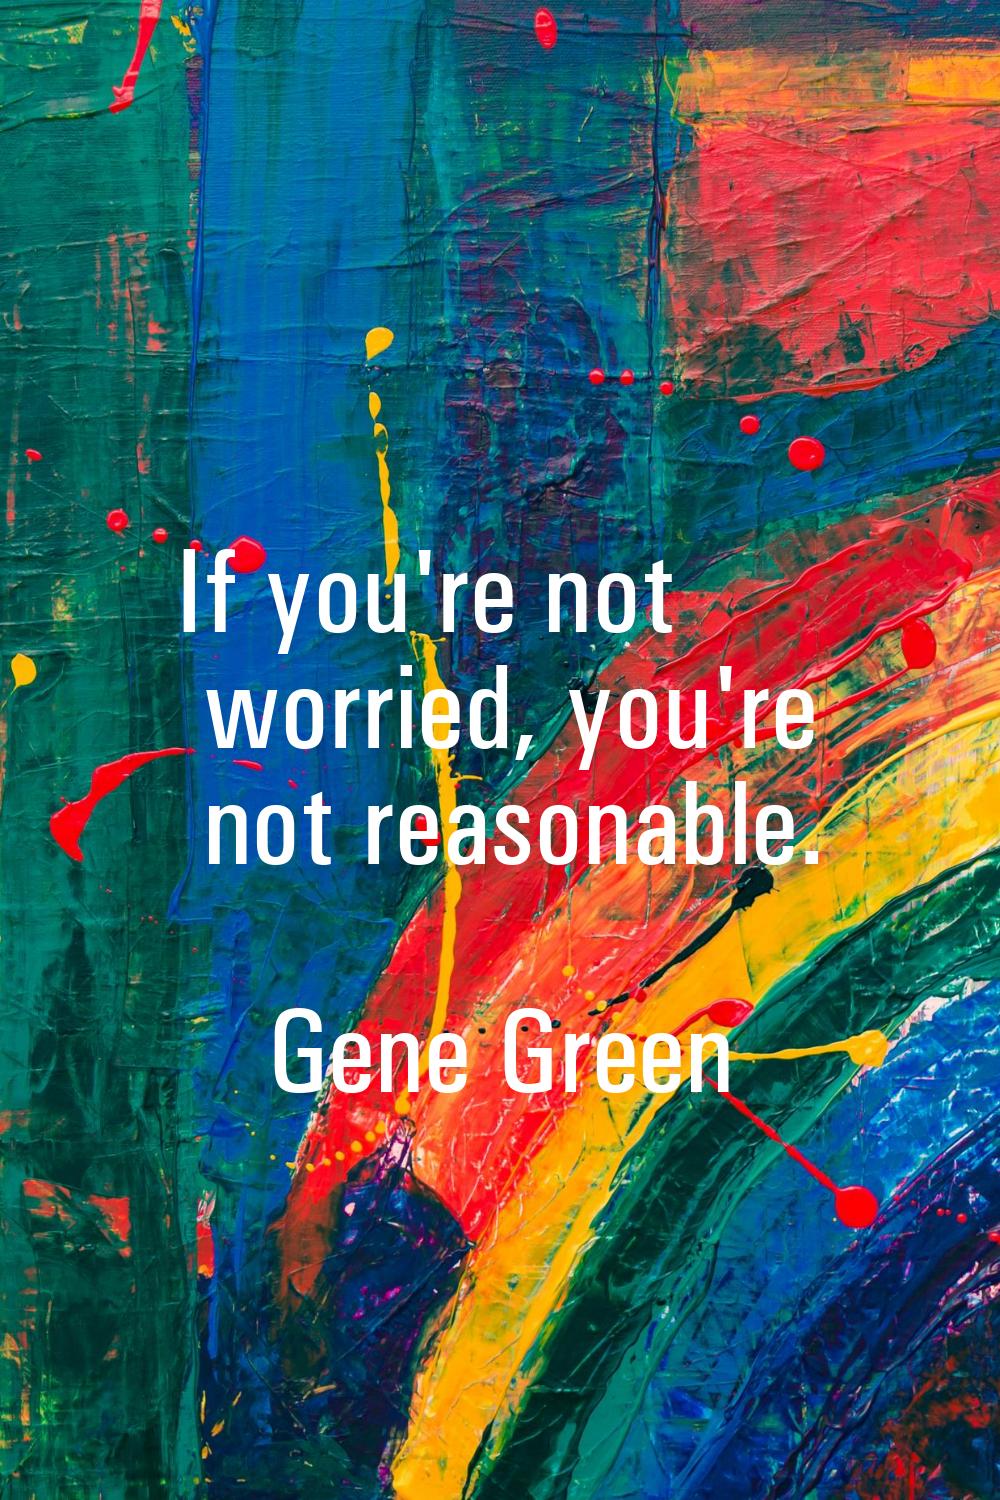 If you're not worried, you're not reasonable.